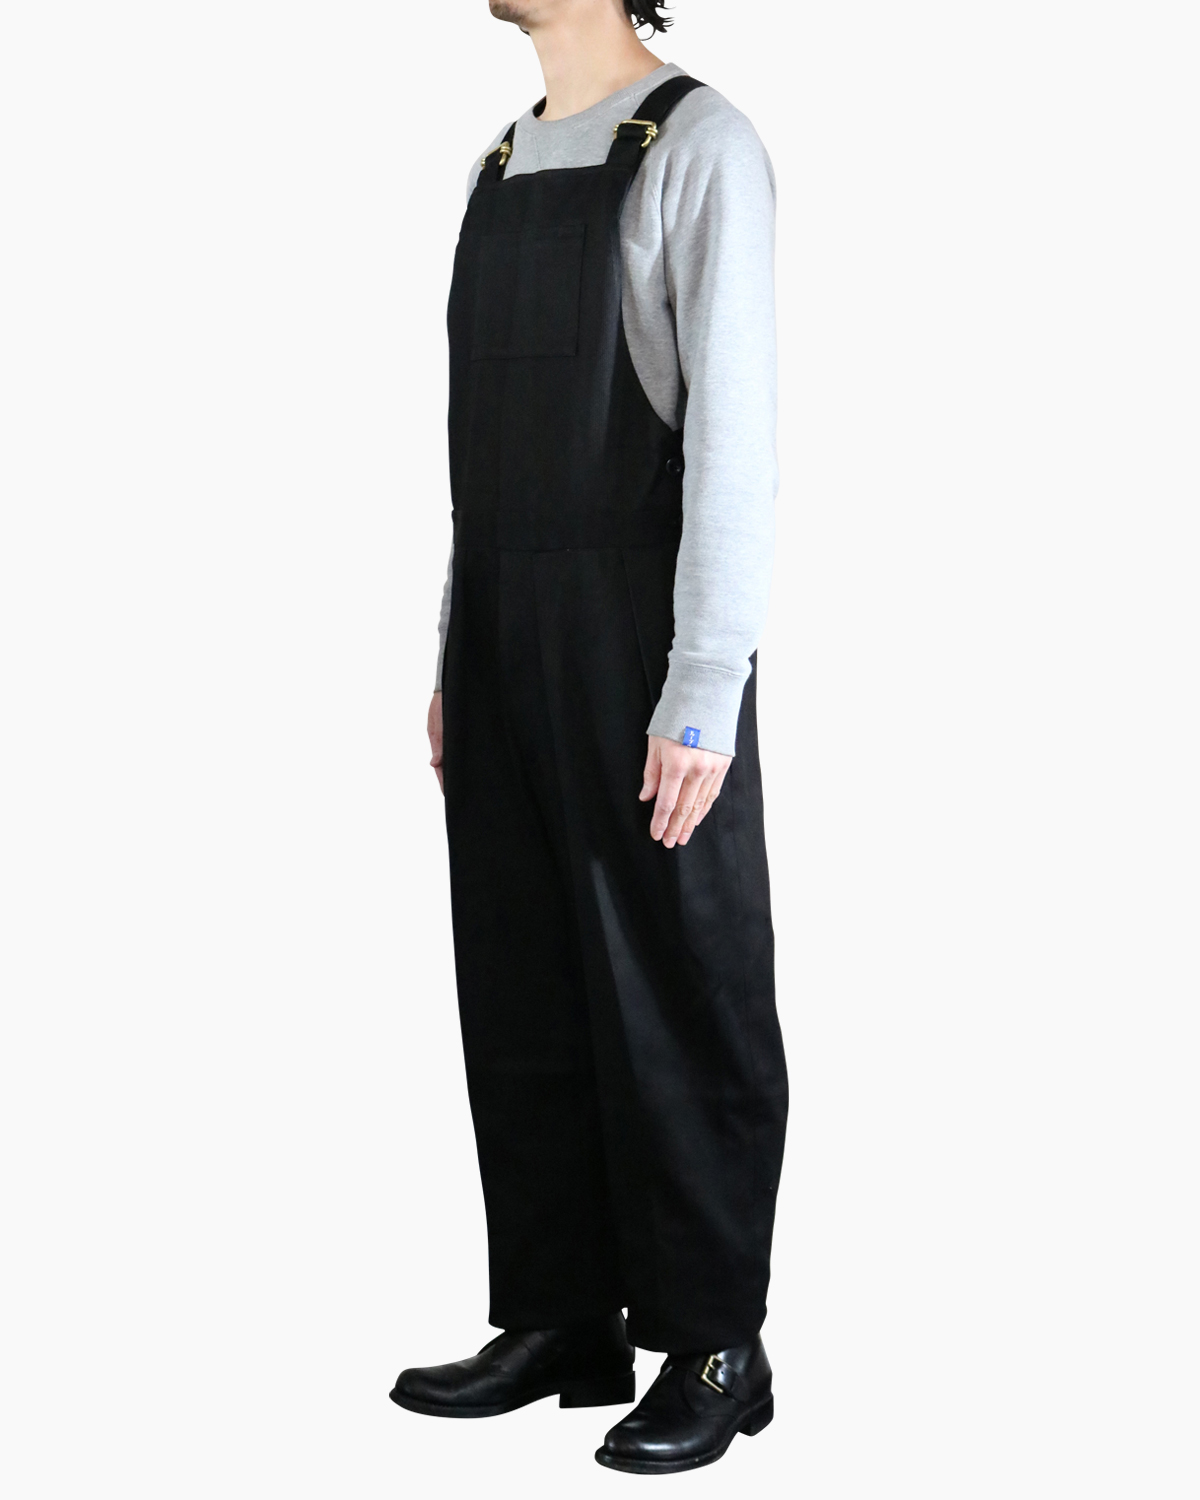 NEAT｜COTTON PIQUE｜OVERALL - Black｜PRODUCT｜Continuer Inc